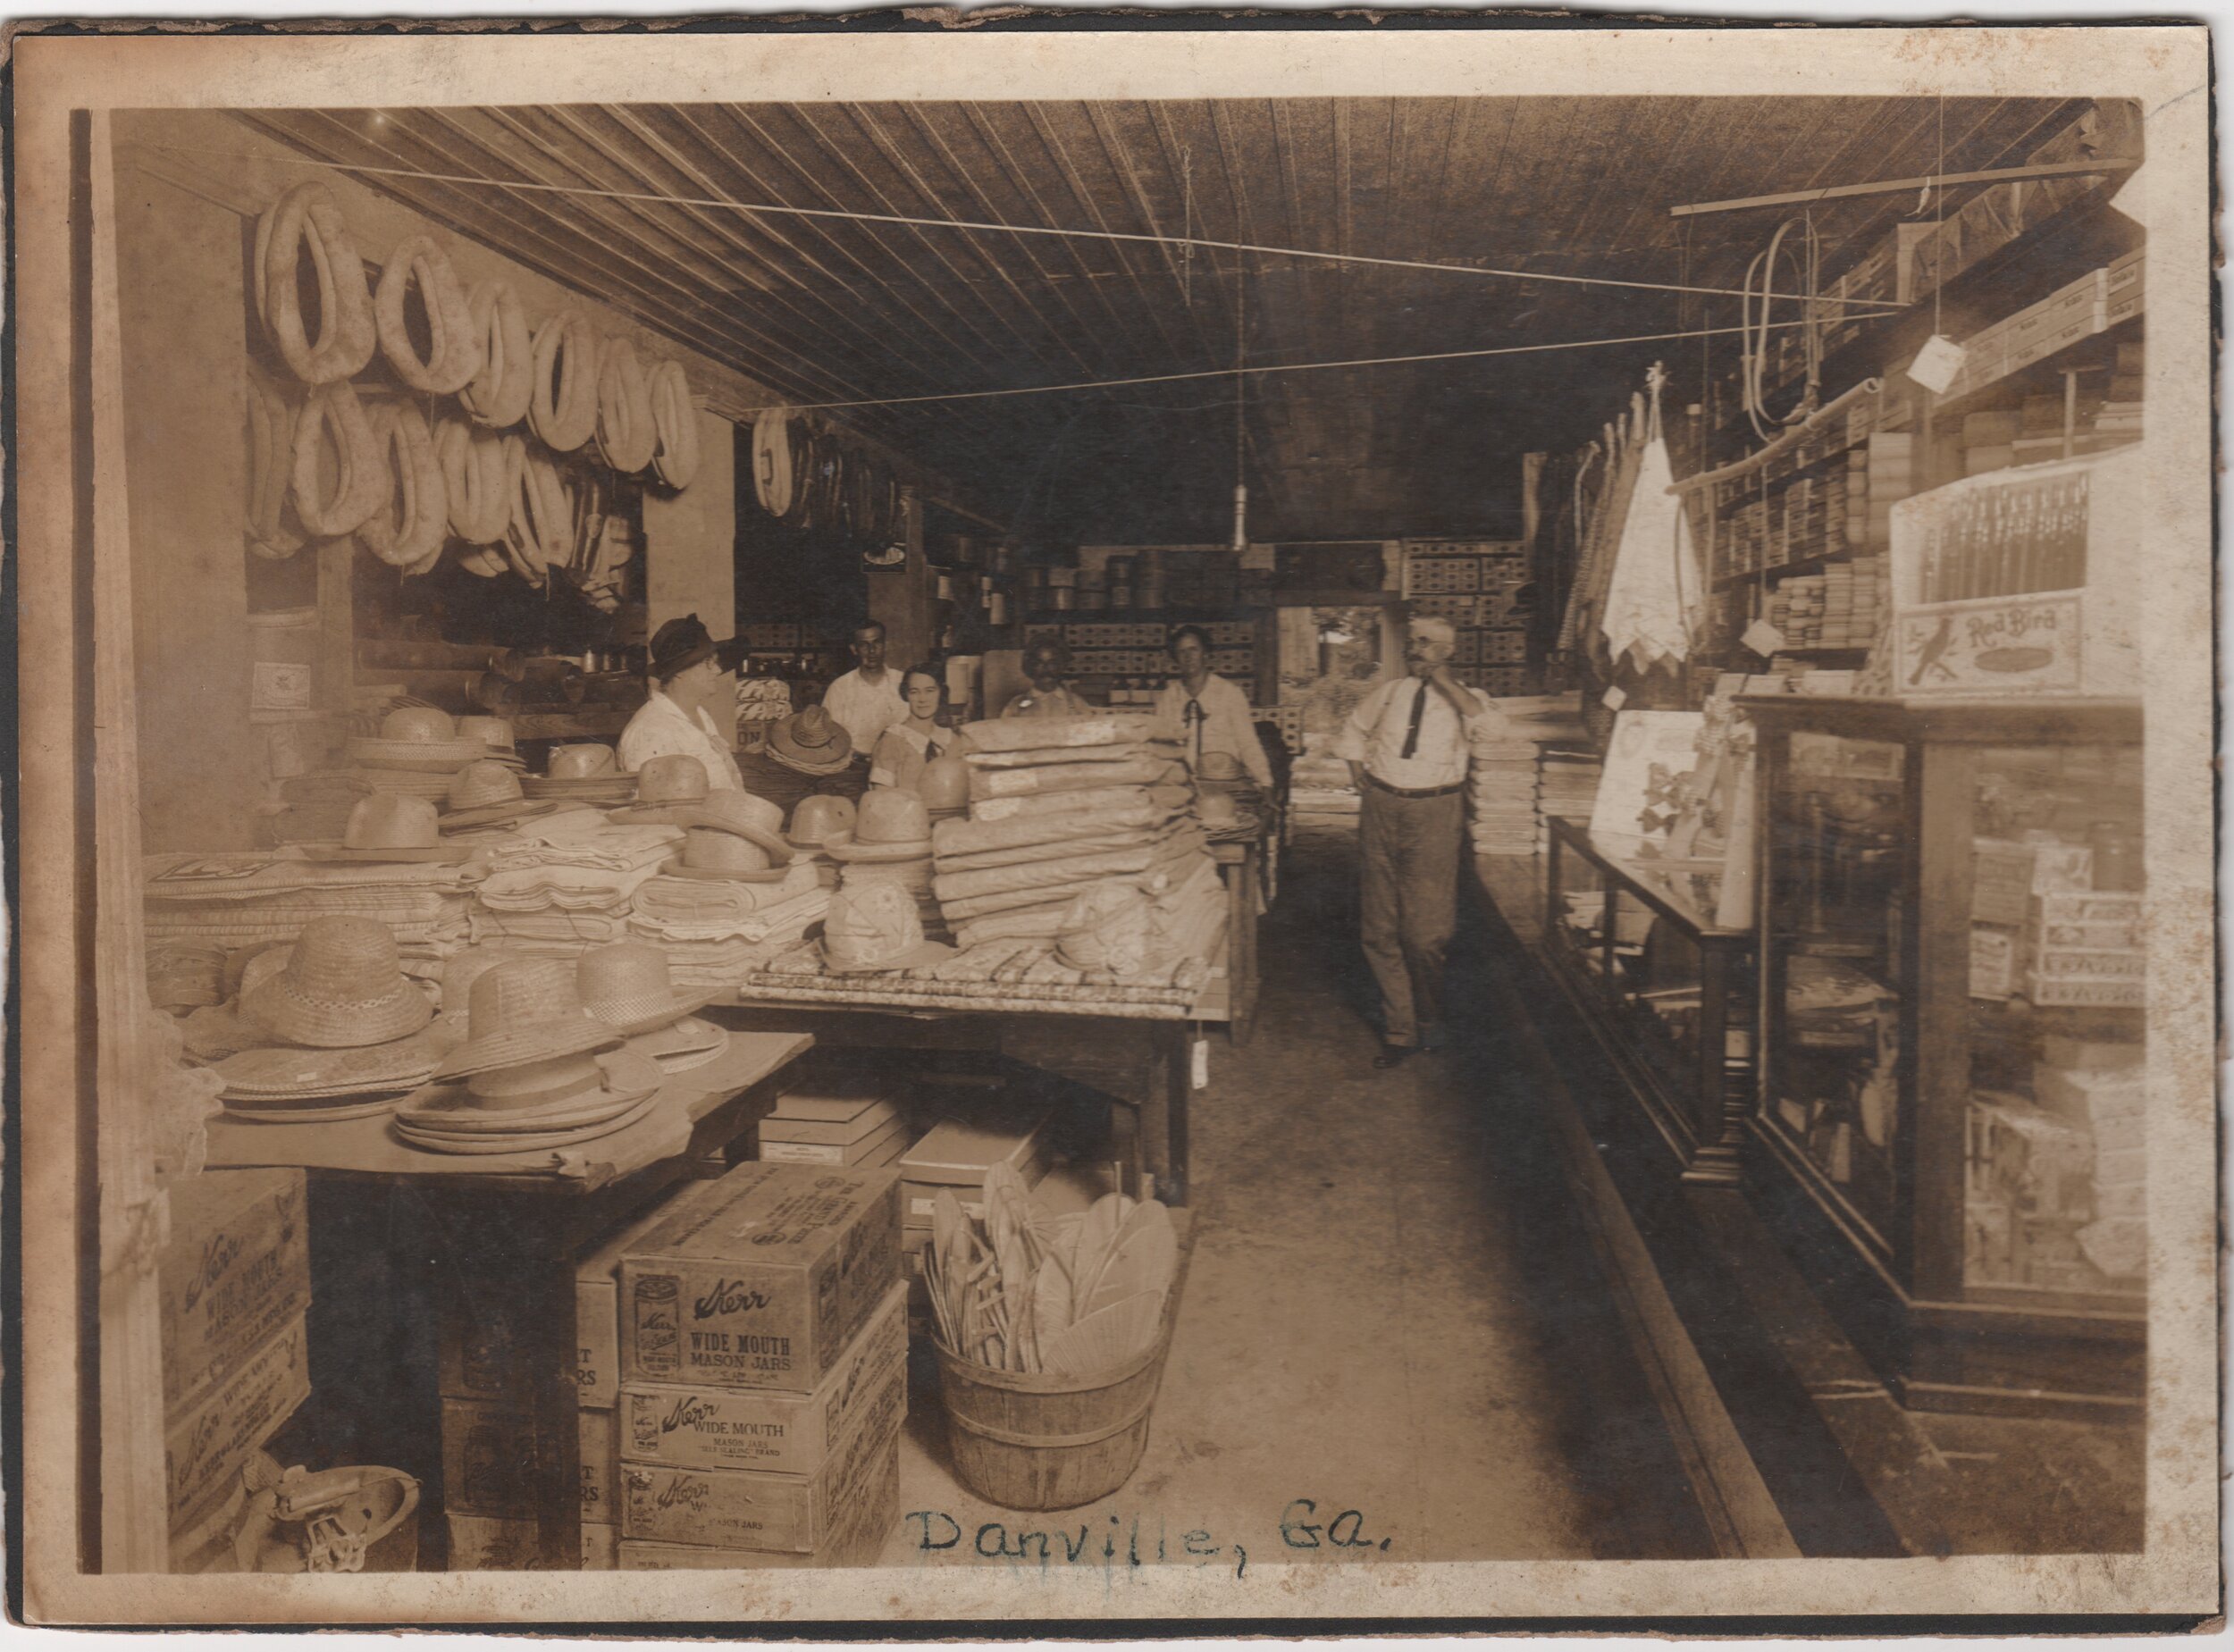 Lee and Stella Price and Their Danville, Georgia Store (about 1926)